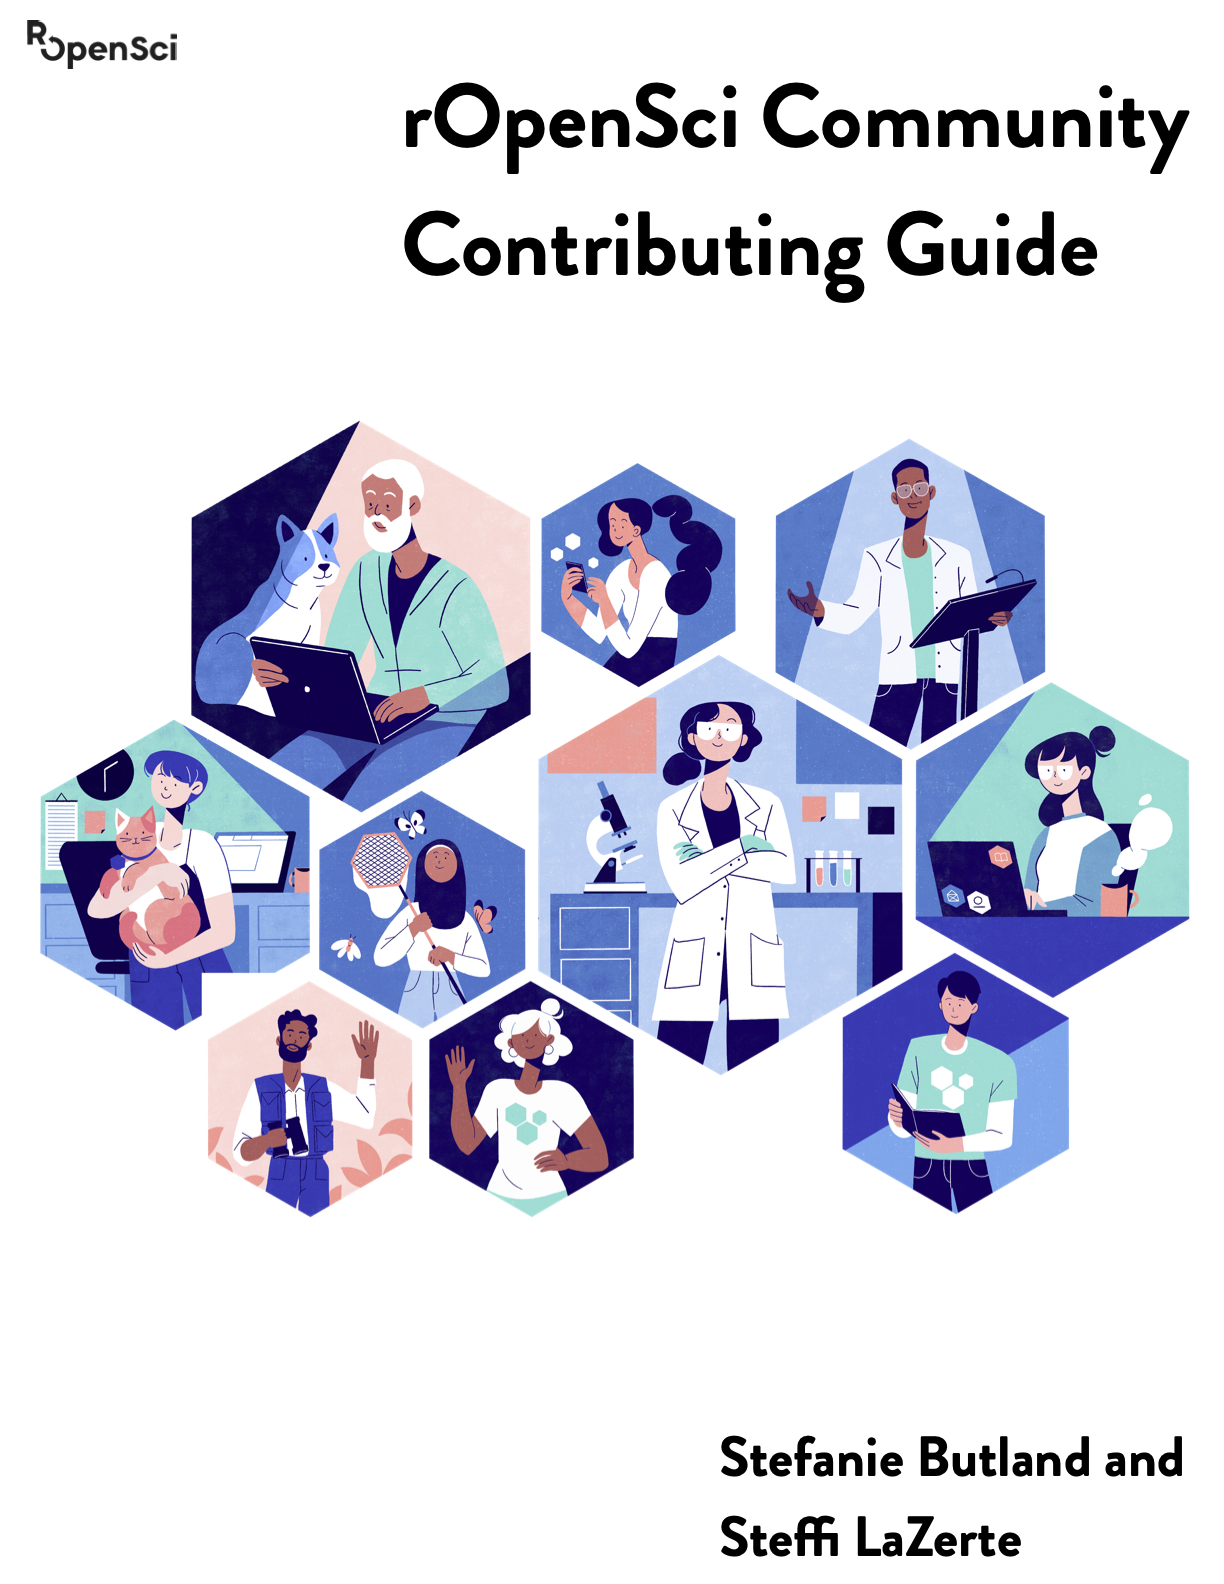 Contributing guide cover featuring hexagonal panels each with a different person doing something different: lab work, computer work, field work, waving, hanging out with a dog/cat.